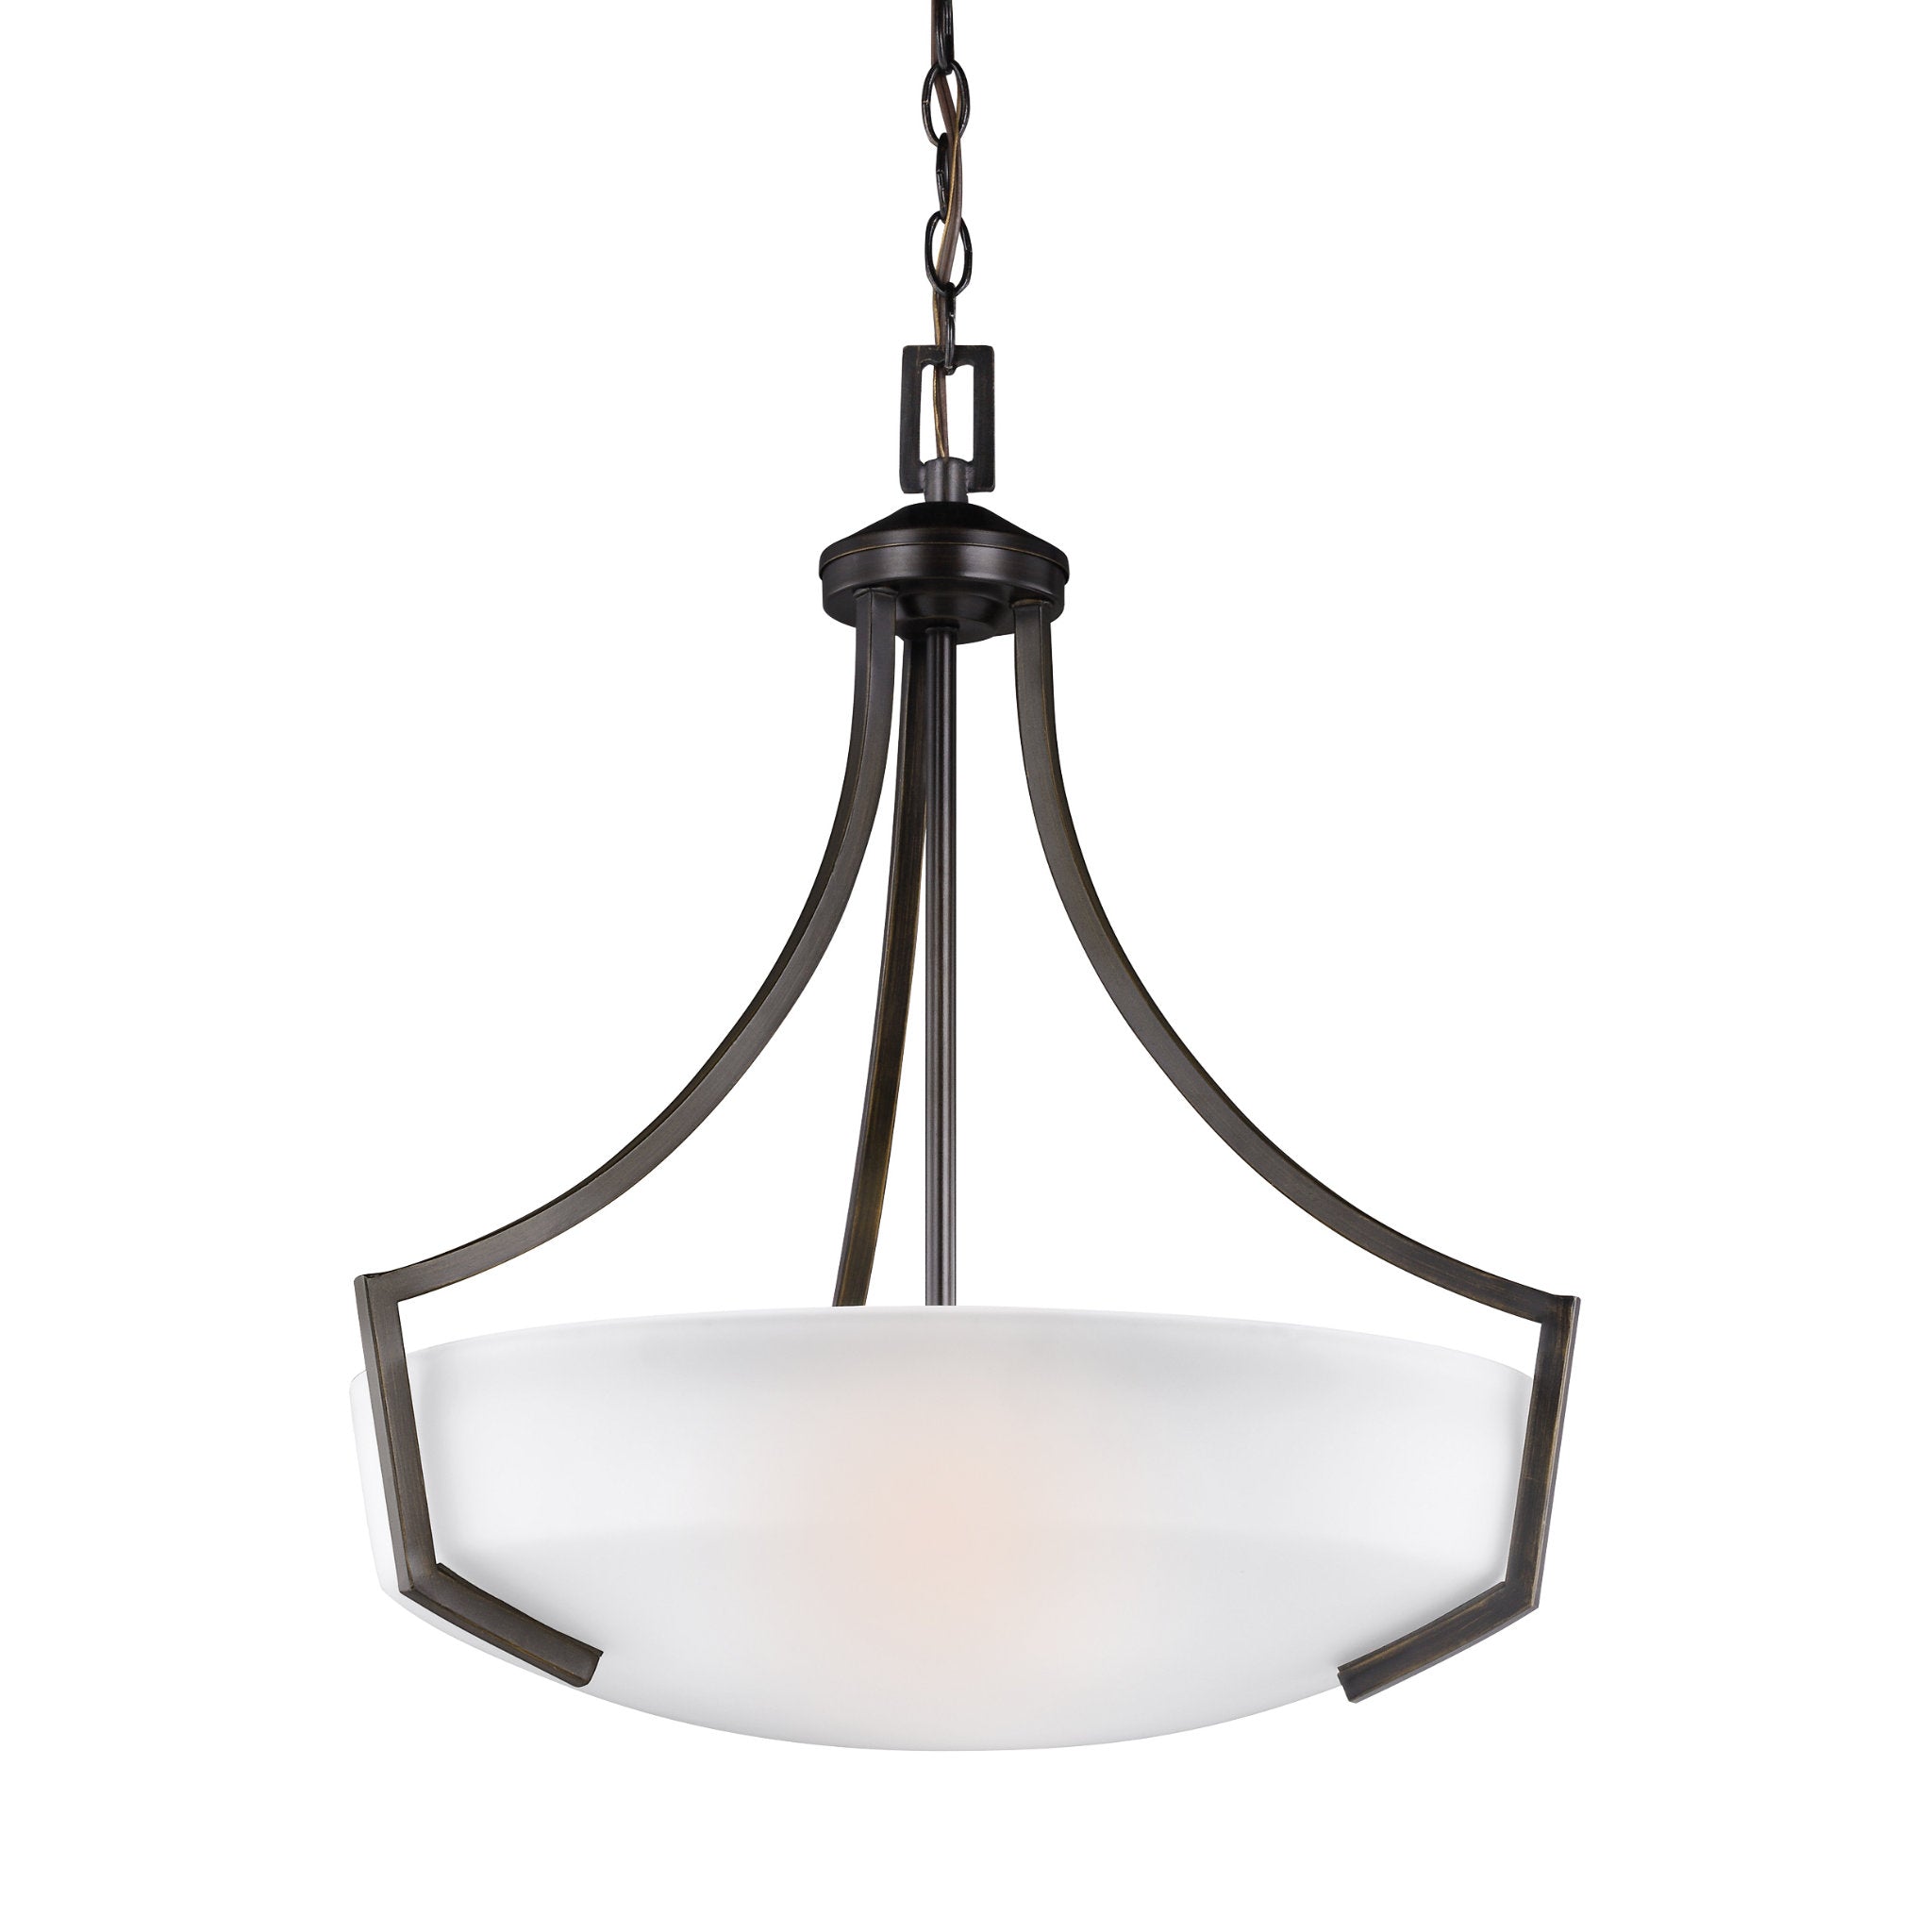 Hanford Three Light Pendant Transitional 22.625" Height Steel Round Satin Etched Shade in Bronze